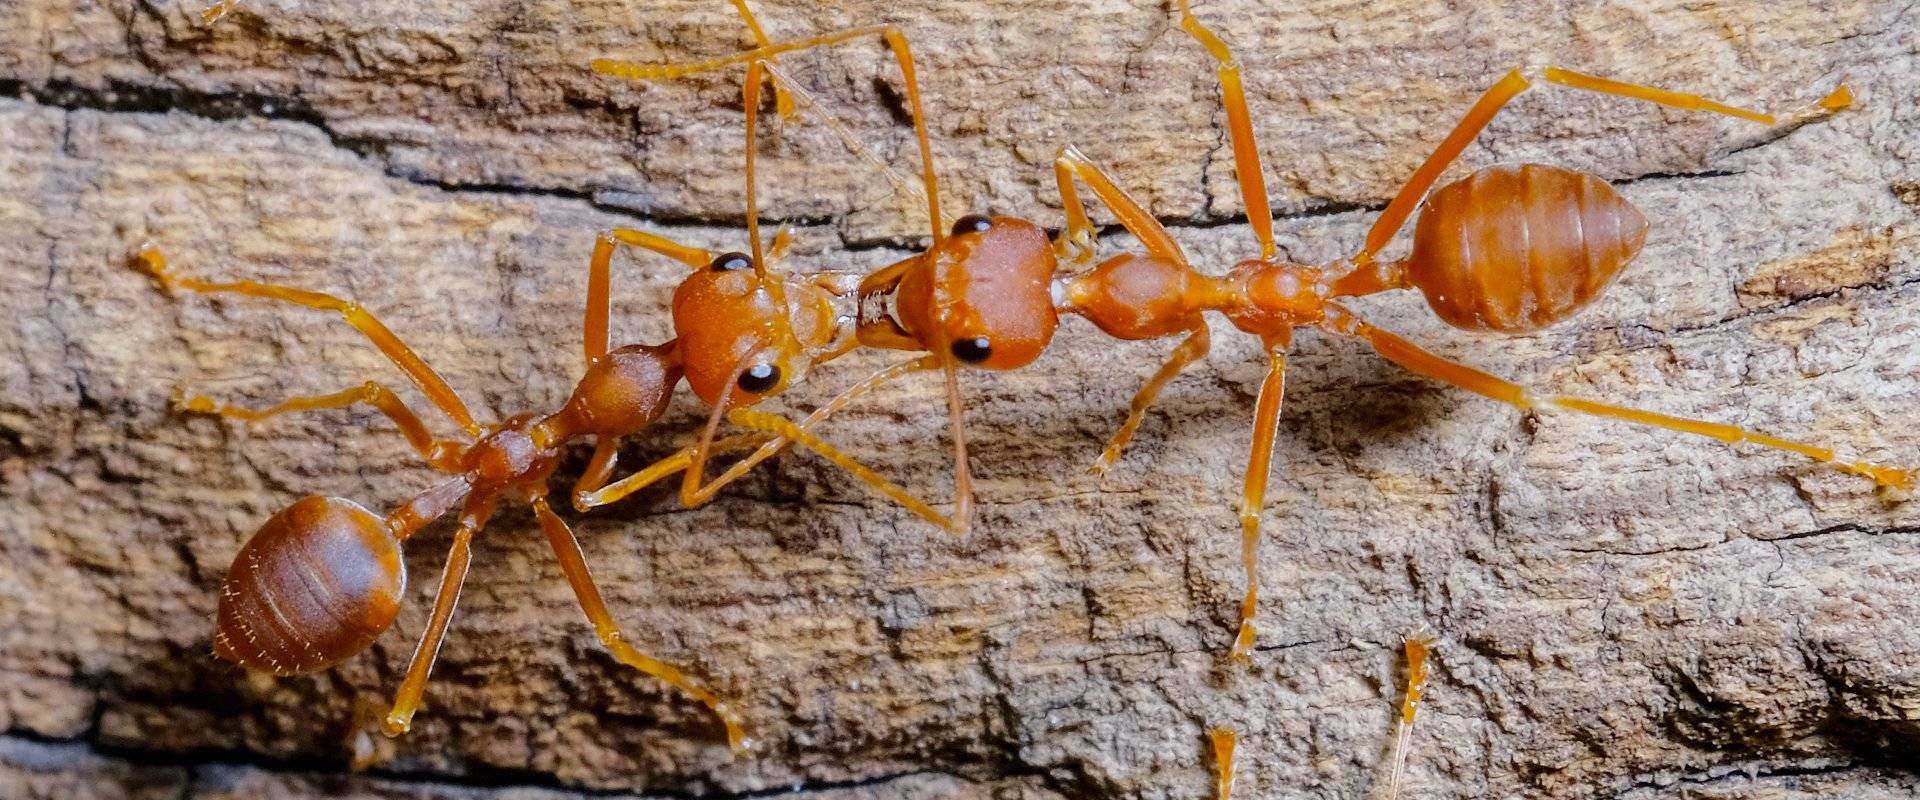 fire ant fighting on wood